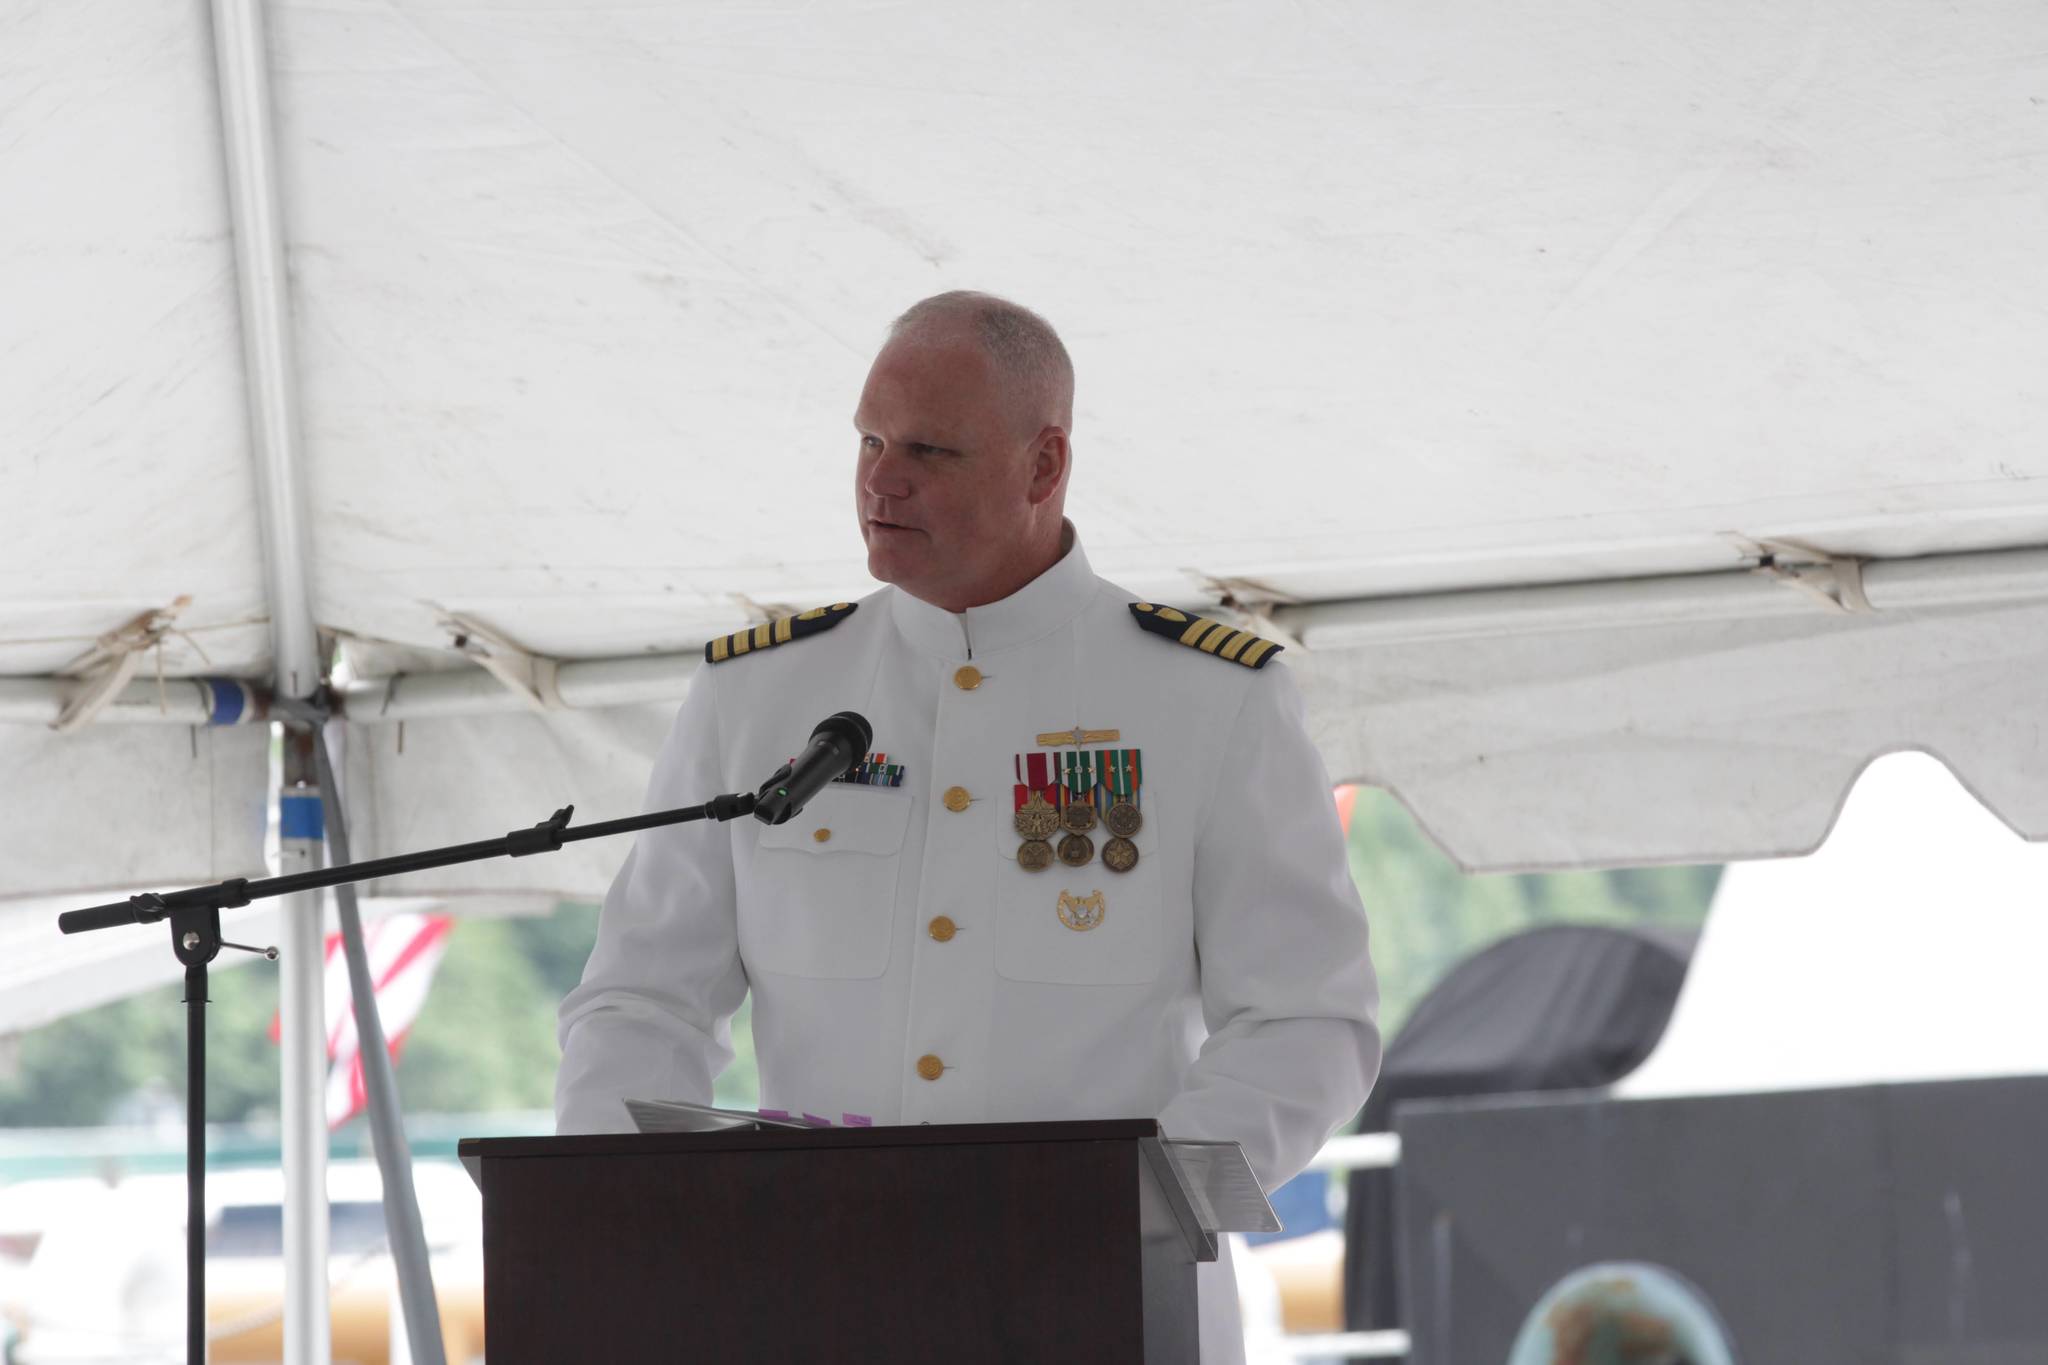 Capt. Darwin R. Jensen, Sector Juneau’s incoming commander, speaks during the change of command ceremony at the station on July 7, 2021. (Michael S. Lockett / Juneau Empire)